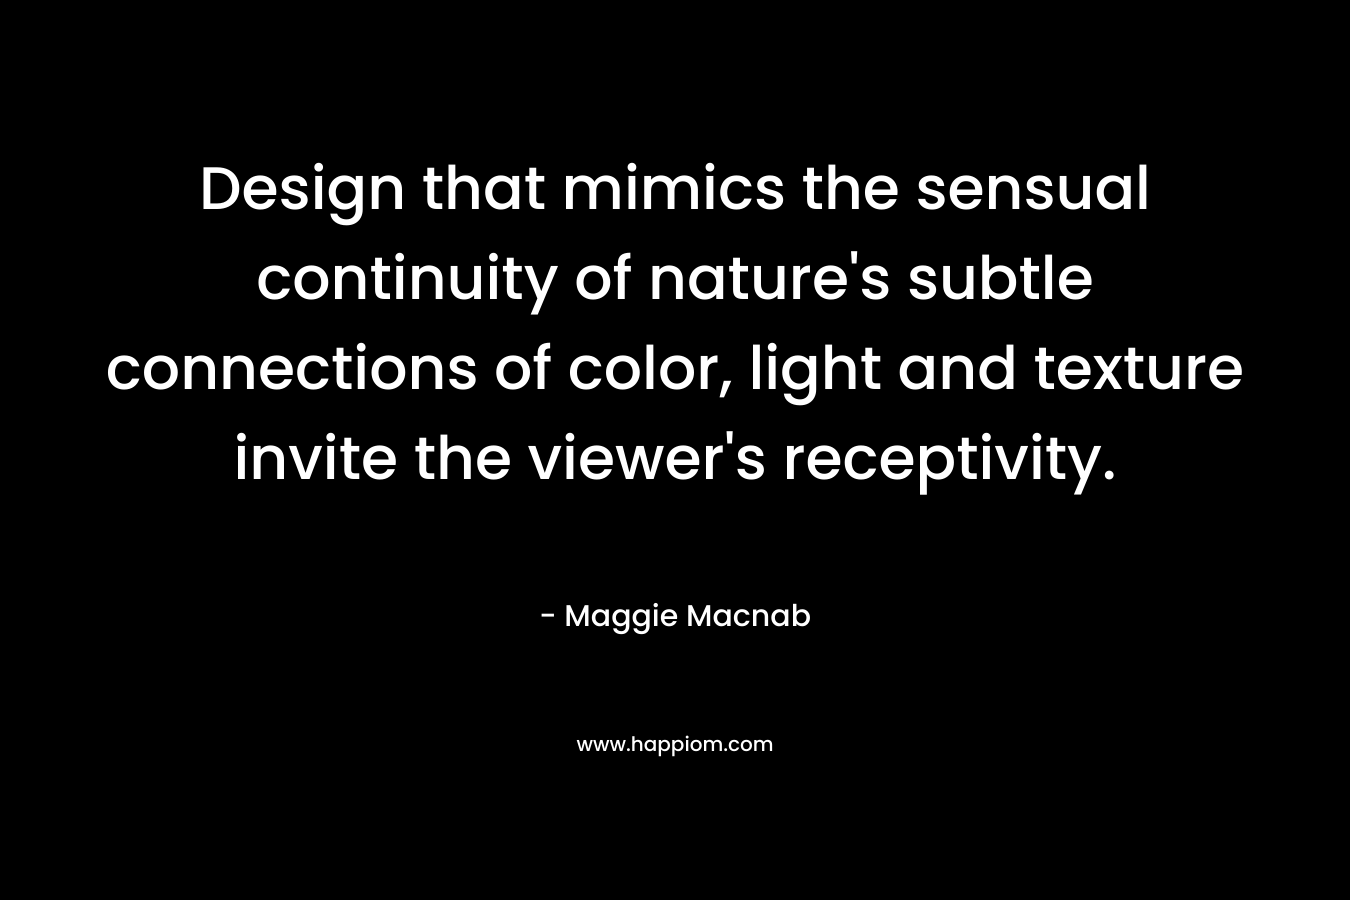 Design that mimics the sensual continuity of nature’s subtle connections of color, light and texture invite the viewer’s receptivity. – Maggie Macnab